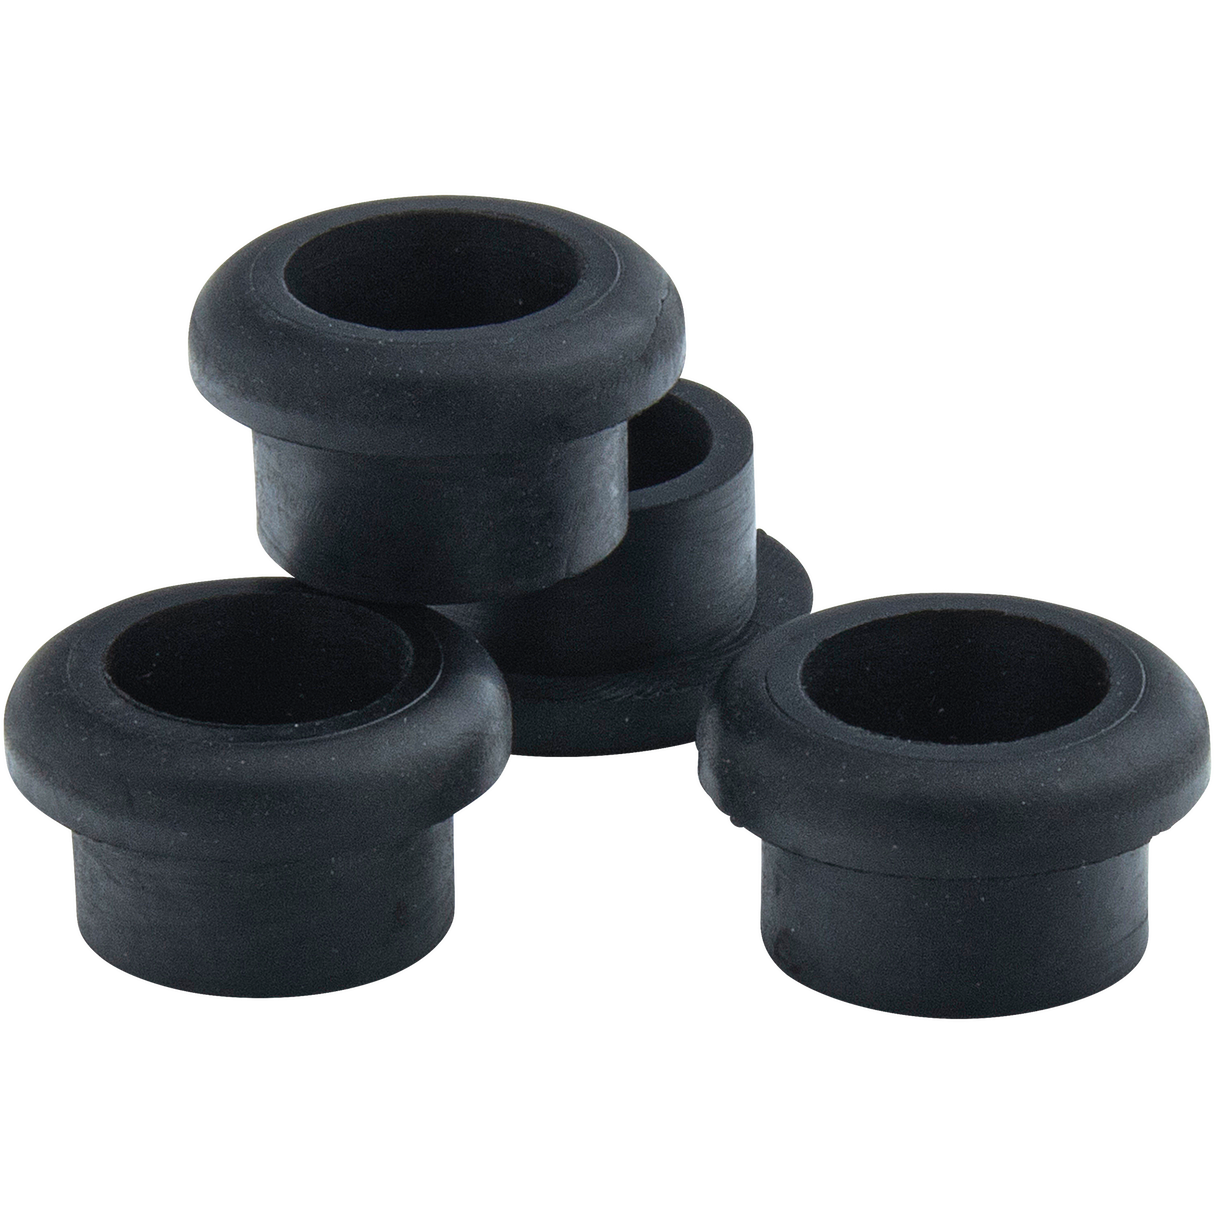 LA Pipes - Black Rubber Grommet 3-Pack for Pull-Stem Bongs, Standard Size, Top View